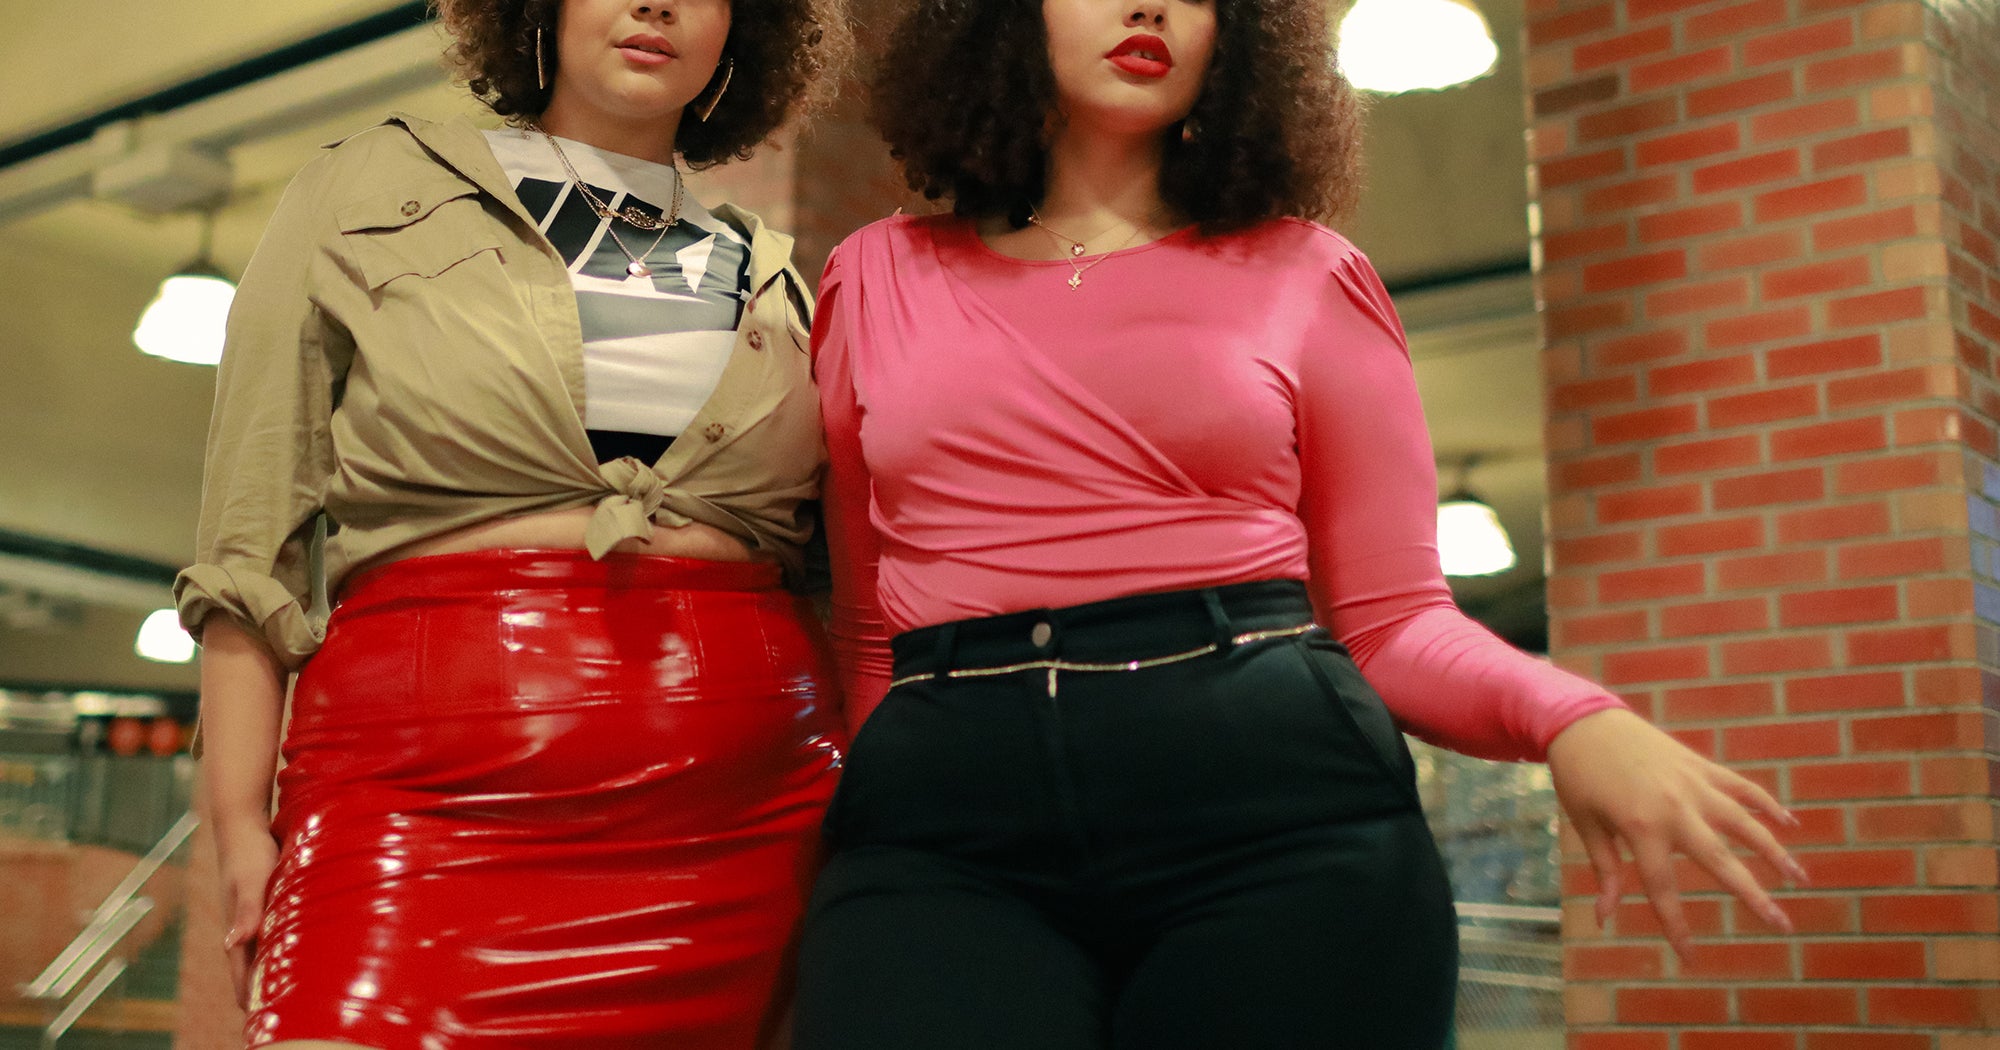 What Shopping Is Really Like for Plus-Size Women